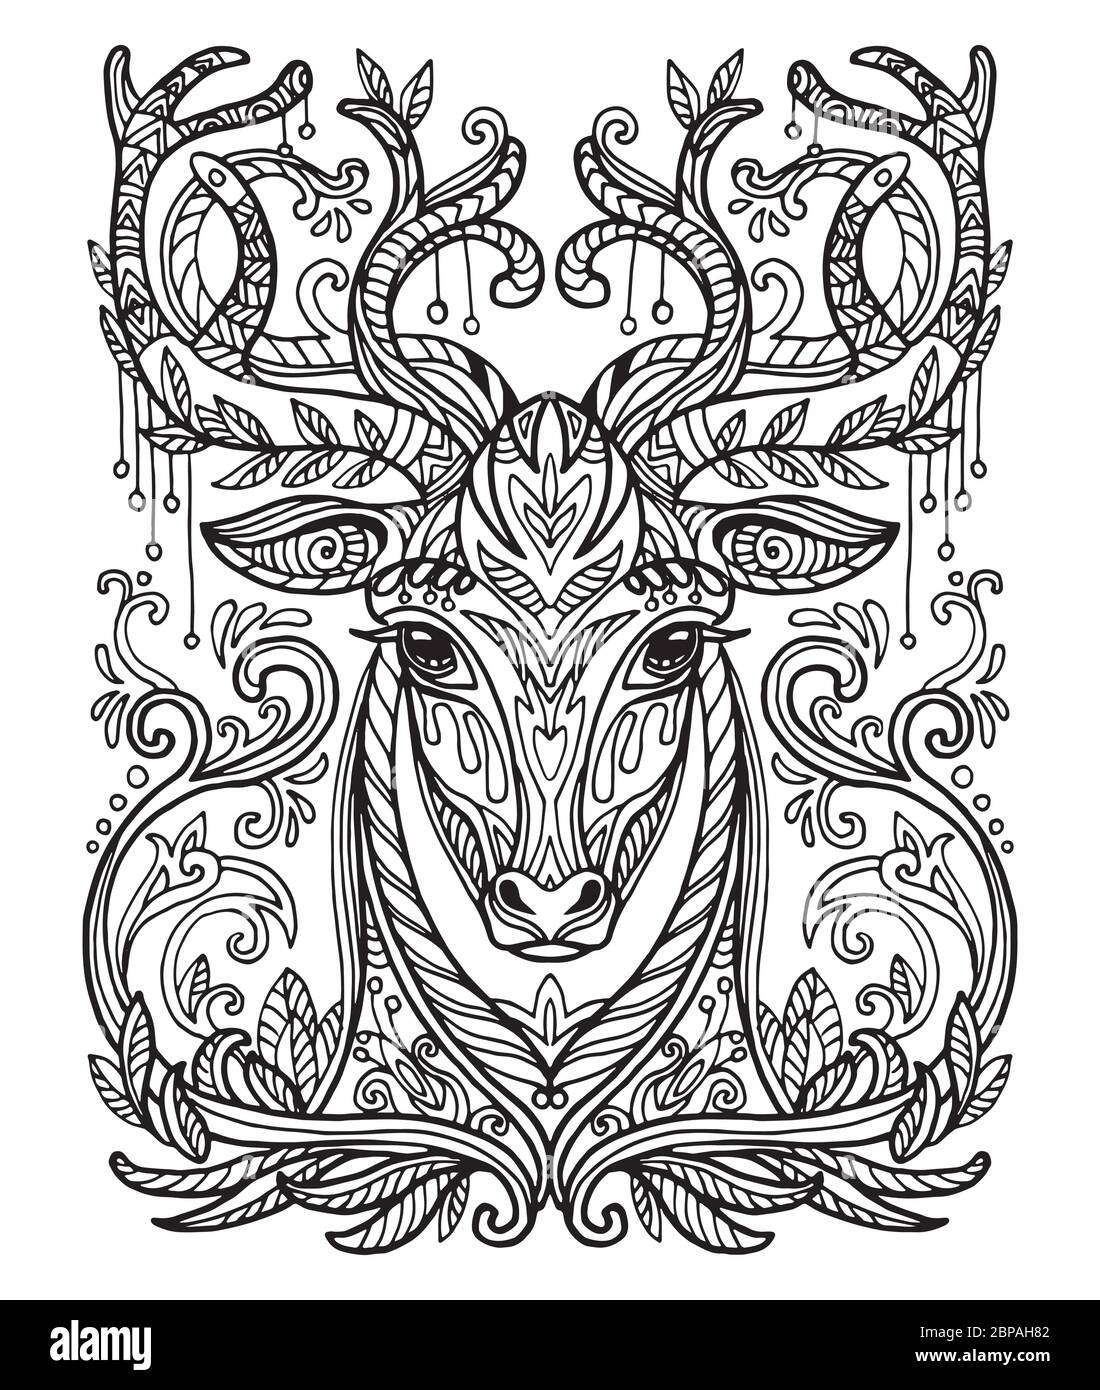 Vector decorative doodle ornamental head of deer. Abstract vector illustration of lion black contour isolated on white background. Stock illustration Stock Vector